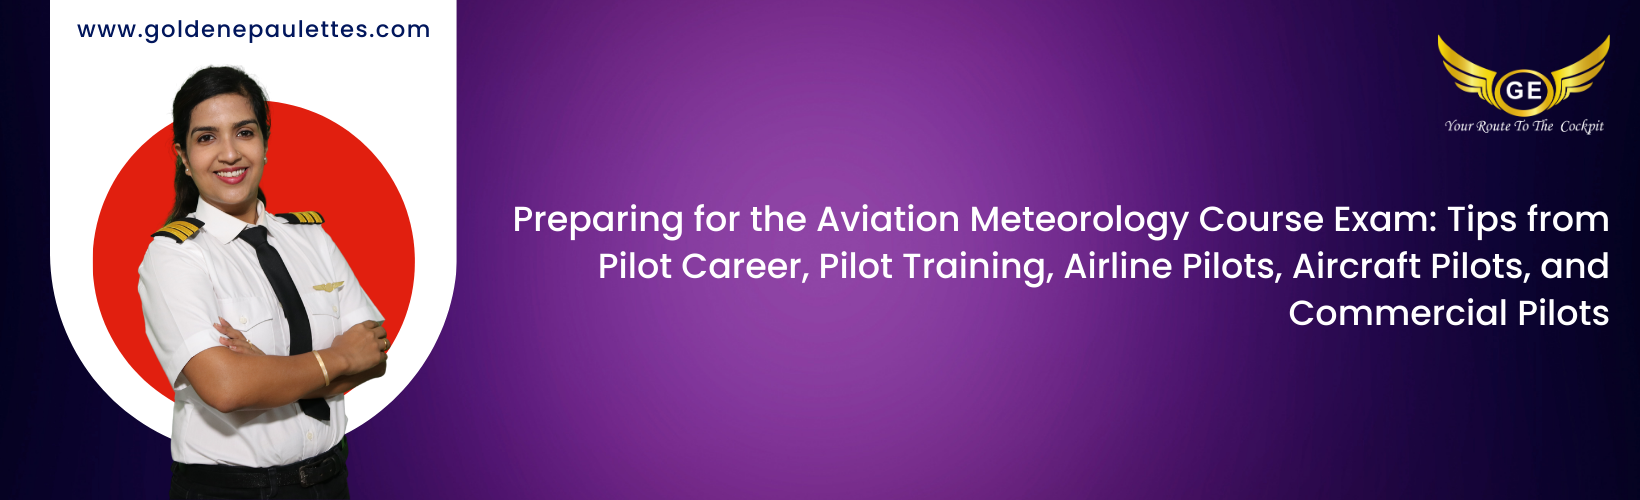 Preparing for the Aviation Meteorology Course Exam